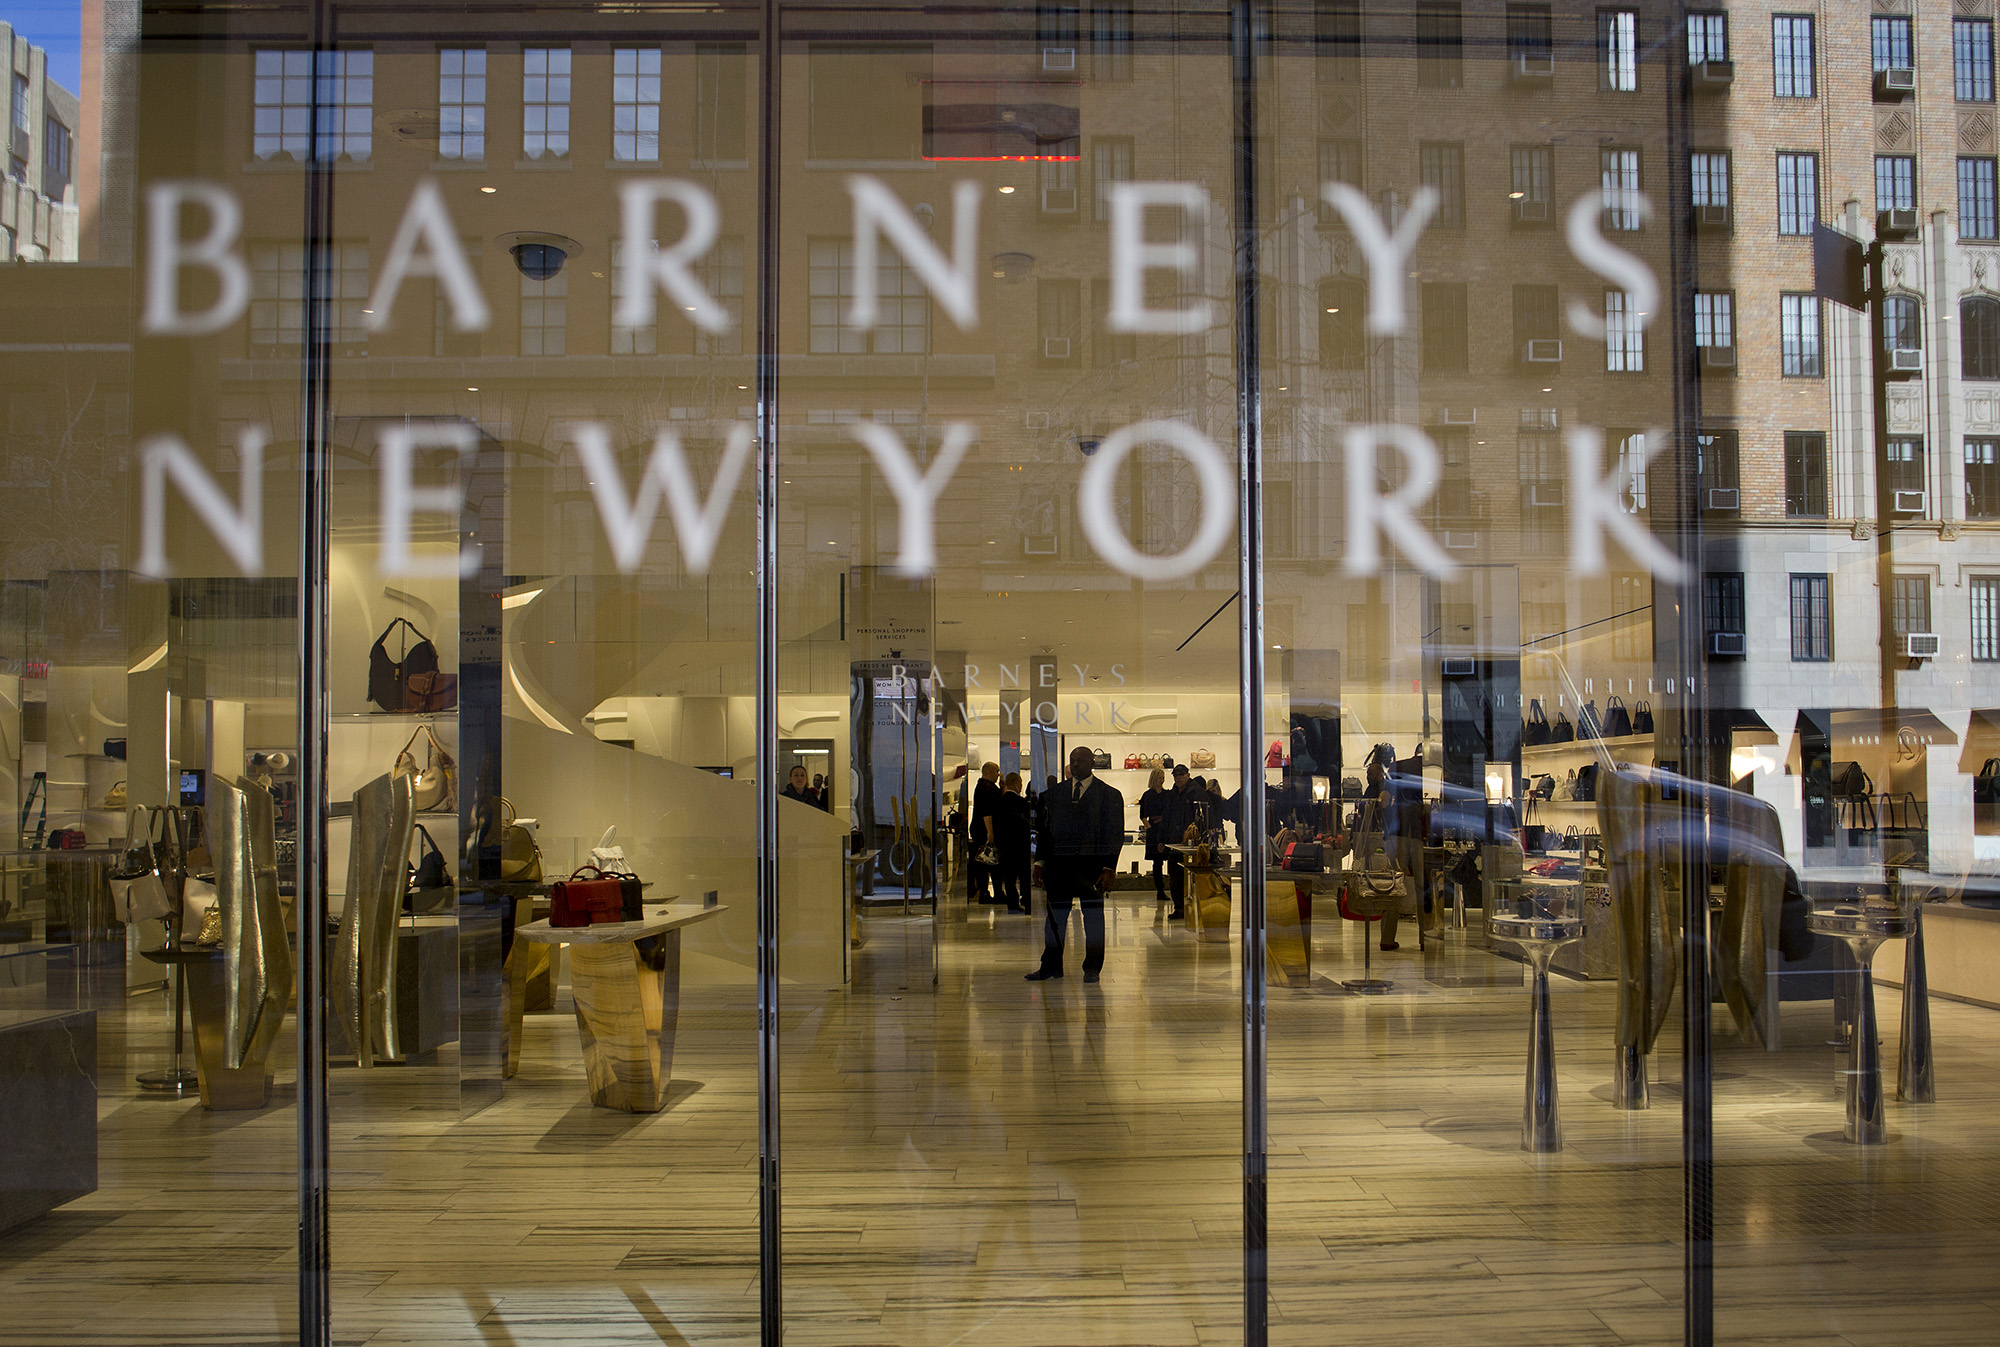 Barneys New York files for bankruptcy